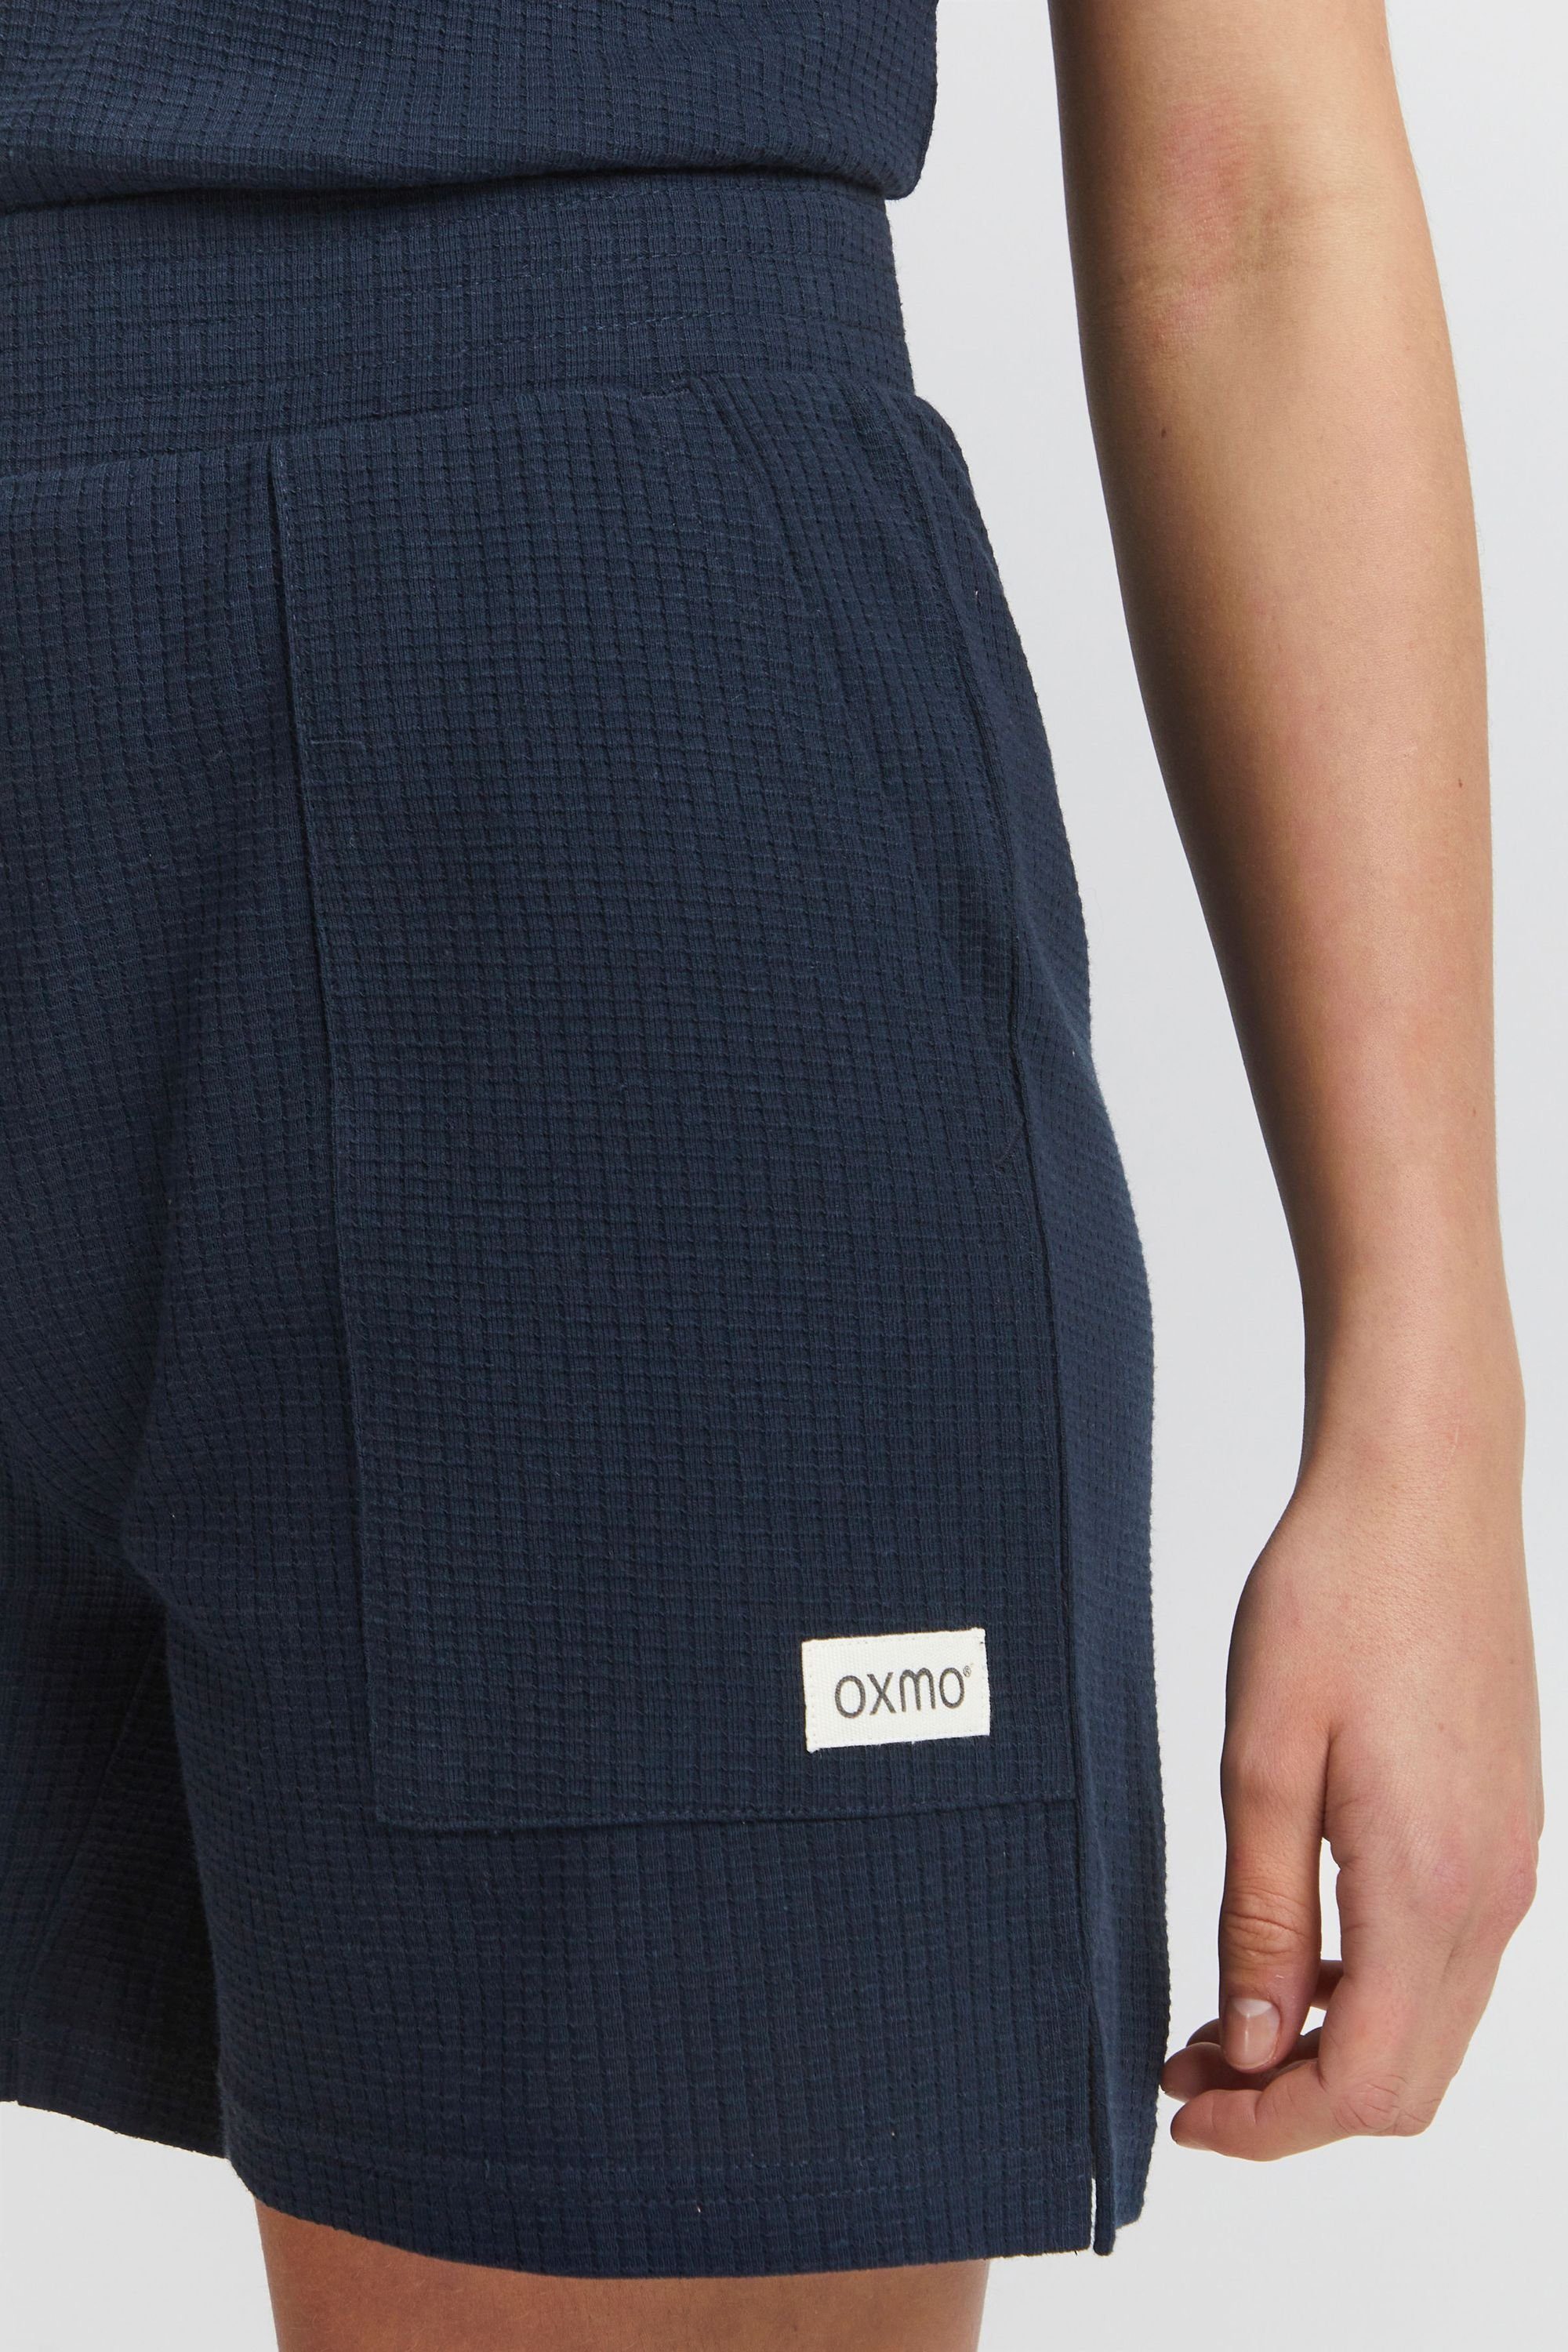 OXMO Eclipse Shorts Total Wim (194010)